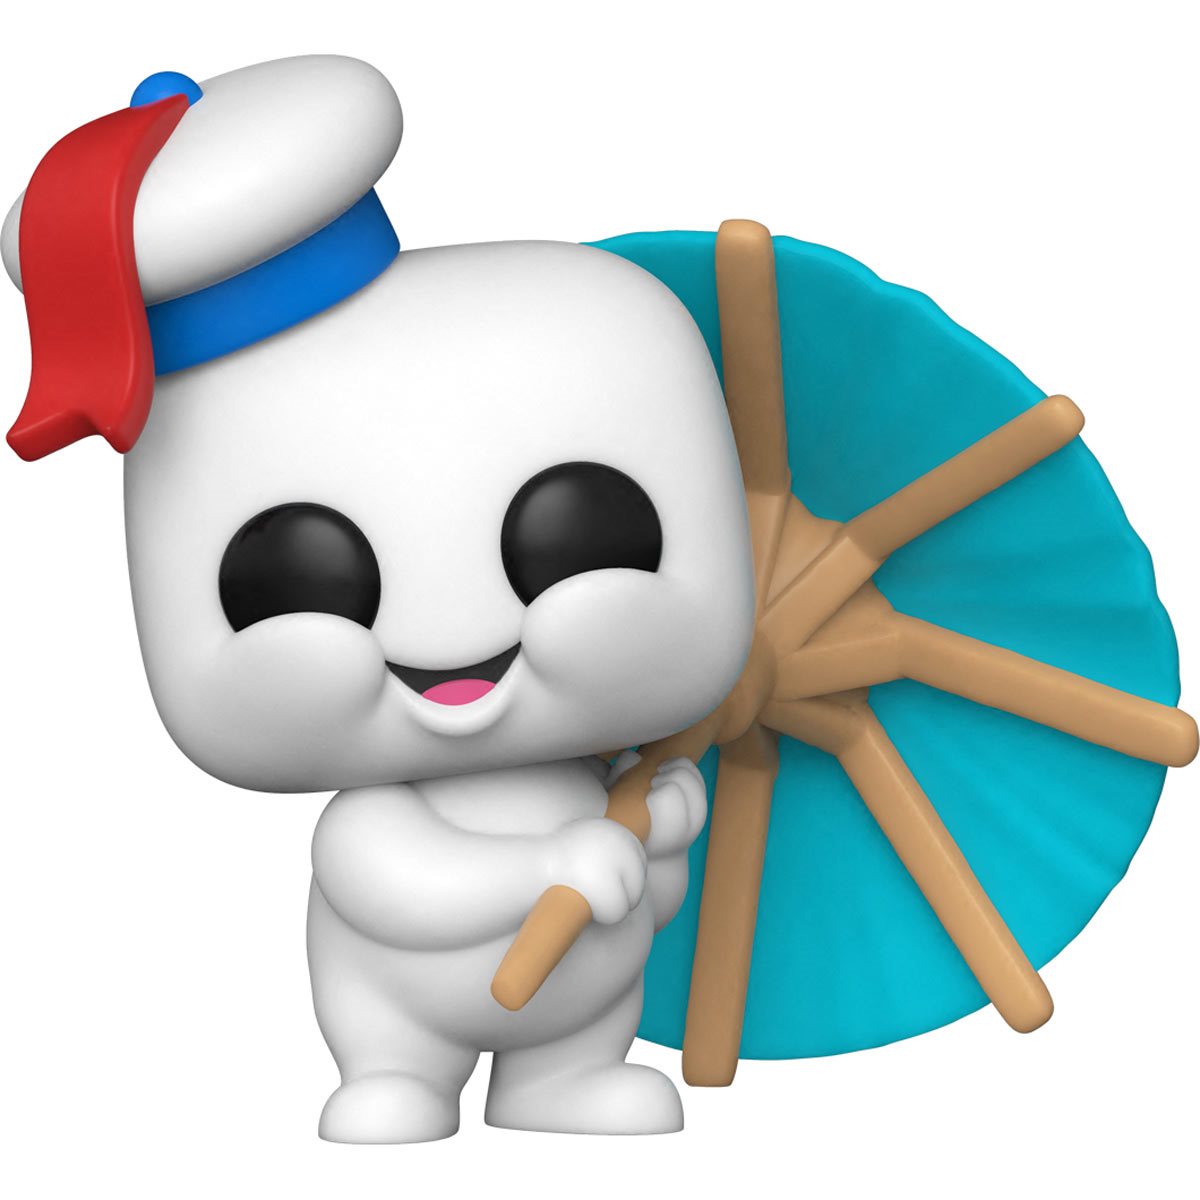 Ghostbusters 3: Afterlife Mini Puft with Cocktail Umbrella Pop! Vinyl Figure 934